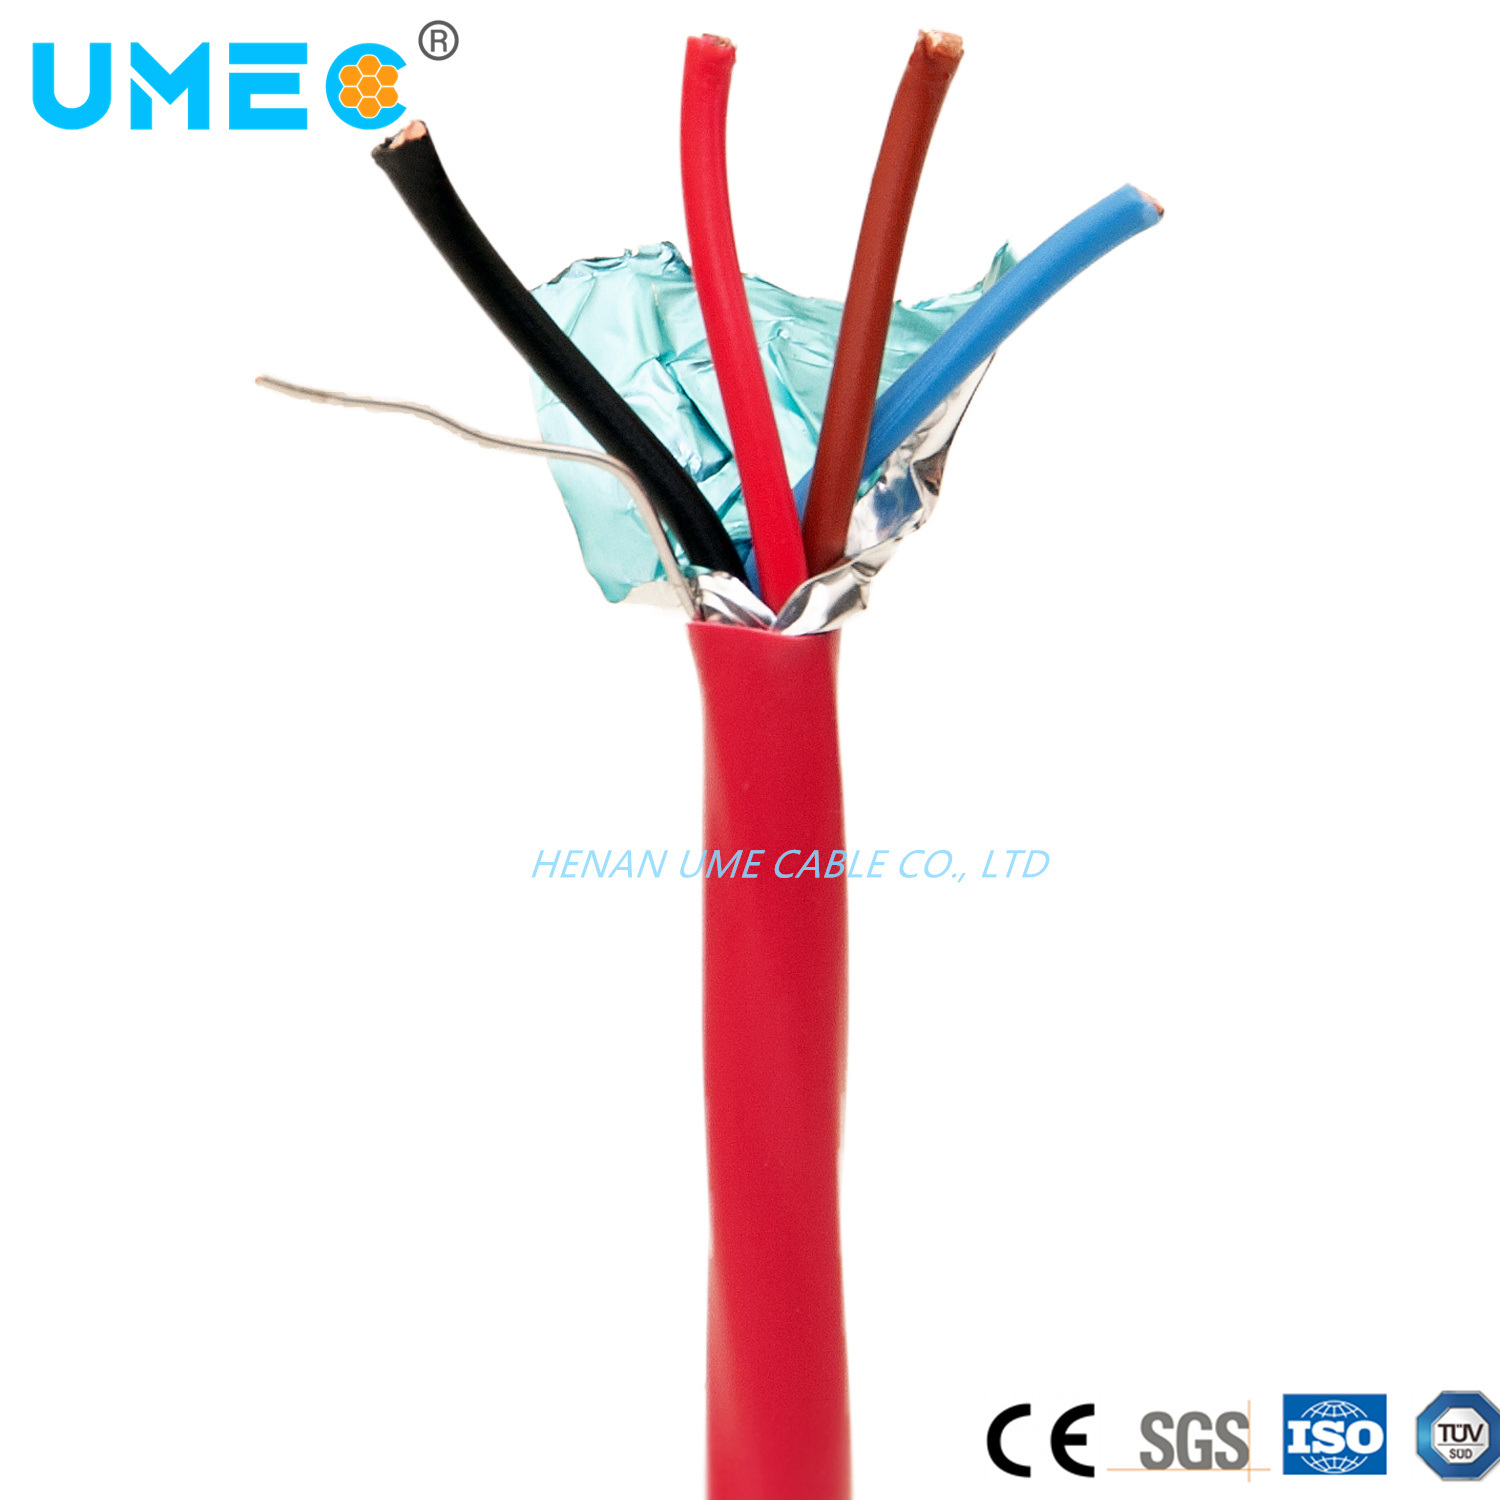 Communication Cable 12/14/16/18/22 AWG Solid Shielded Unshielded 2c/4c/6c/8c Fplr Security Fire Alarm Cable